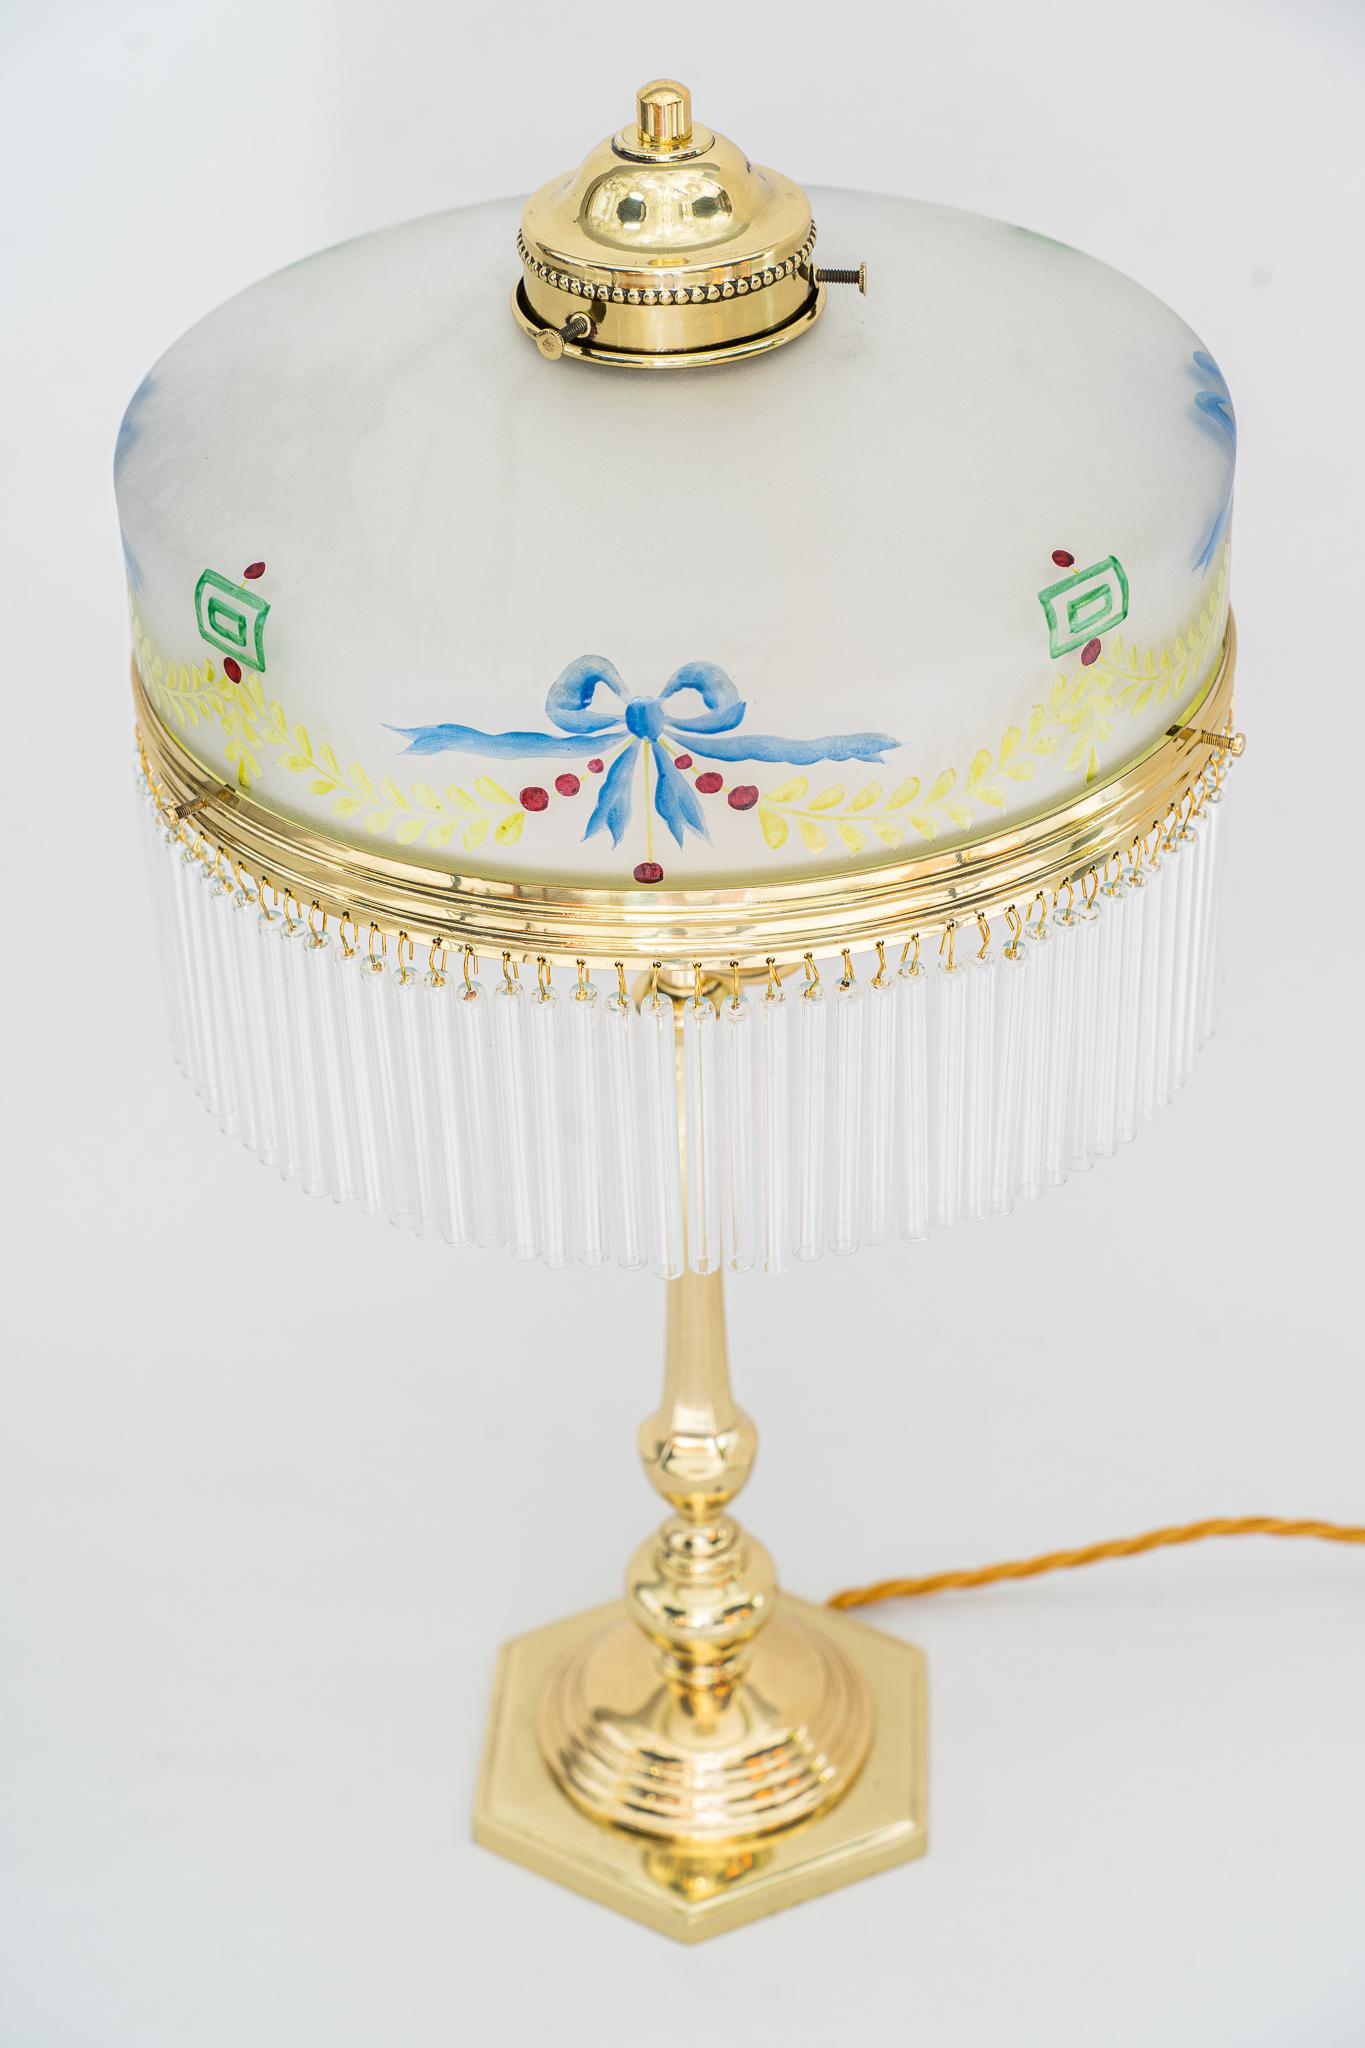 Art Deco table lamp with original painted glass shade vienna around 1920s
Brass polished and stove enameled.